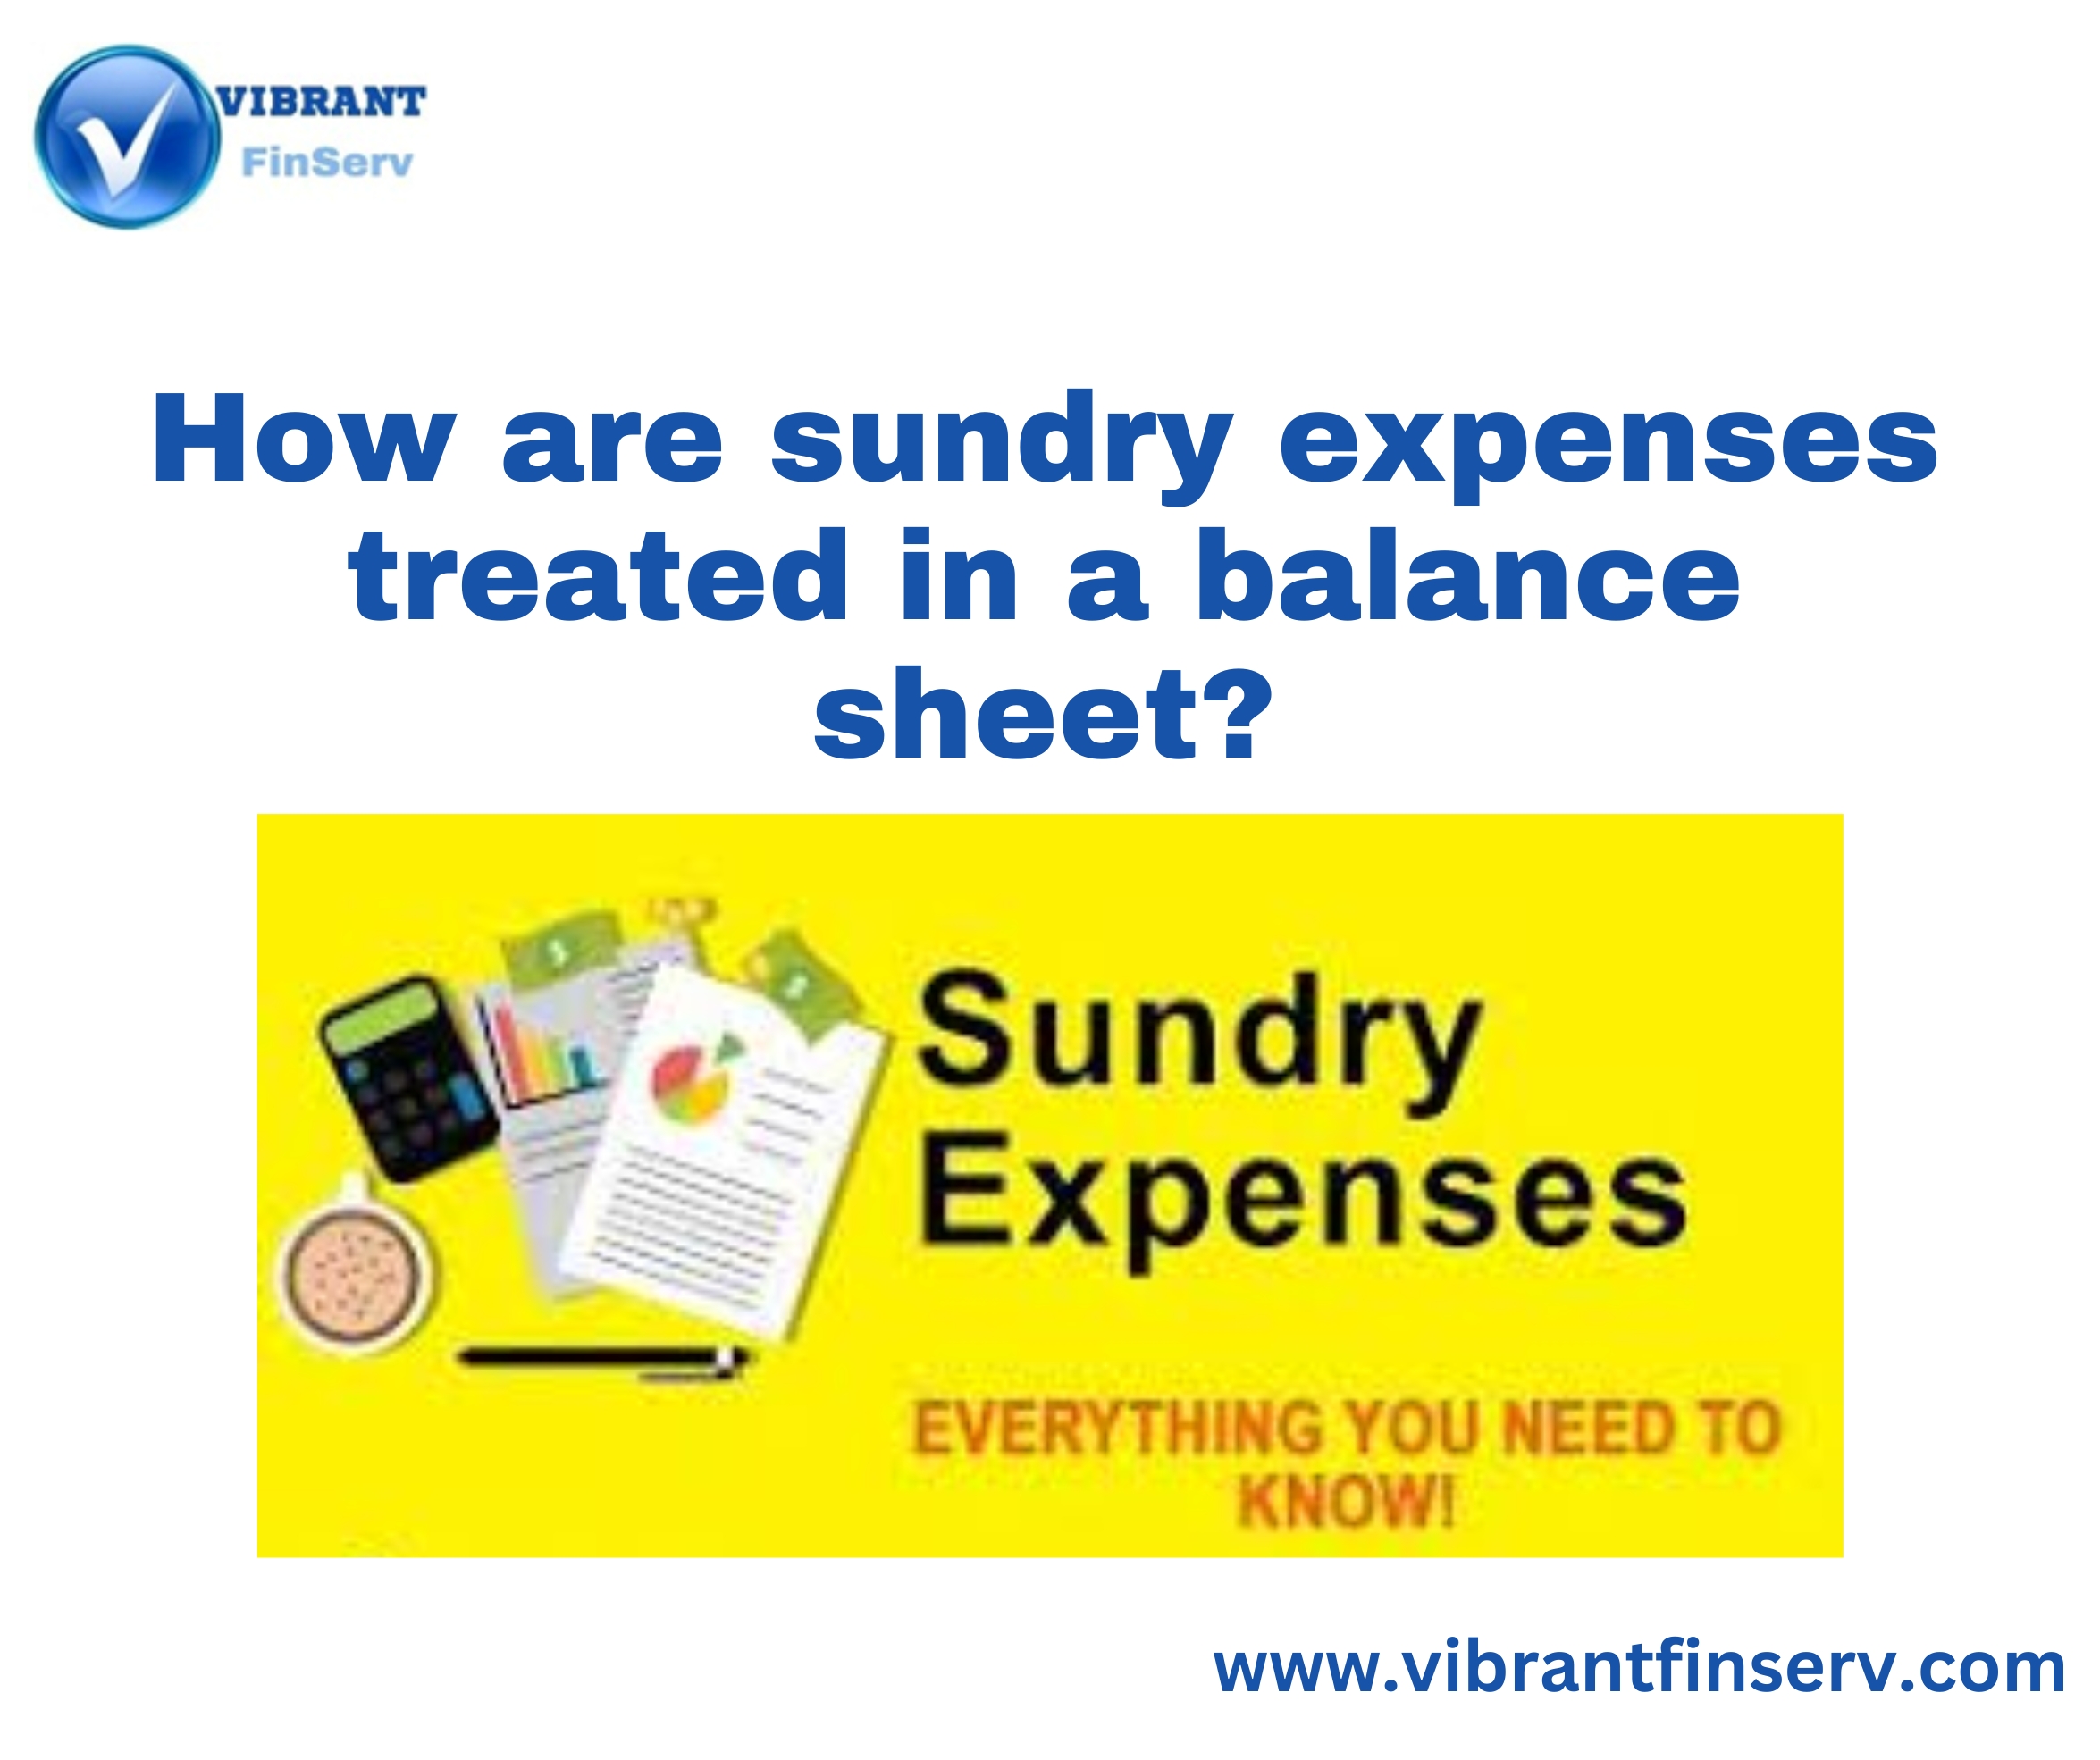 Sundry Expenses Treated in a Balance Sheet